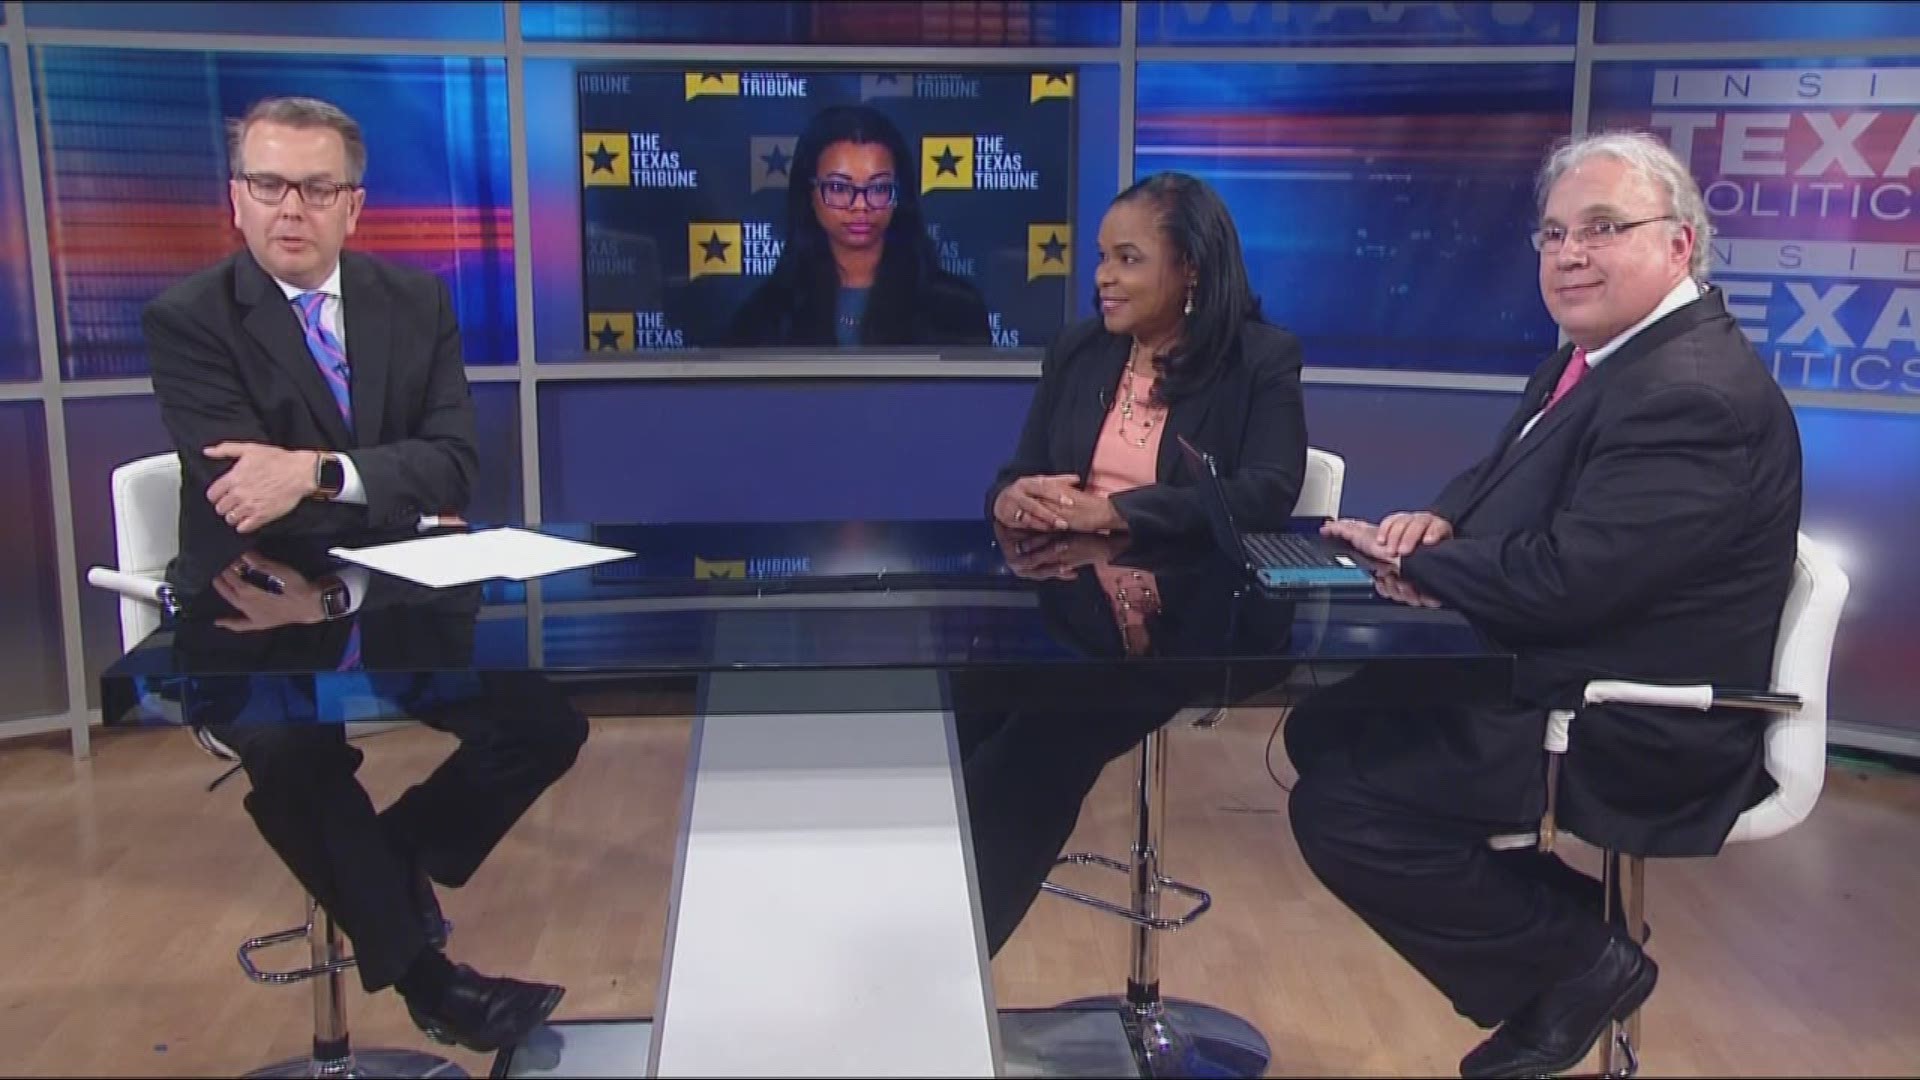 Reporters Roundtable puts the headlines in perspective each week. Host Jason, Bud and Alex returned along with Berna Dean Steptoe, WFAA's political producer. They examined why Republicans are having a difficult time finding cities willing to host the 2020